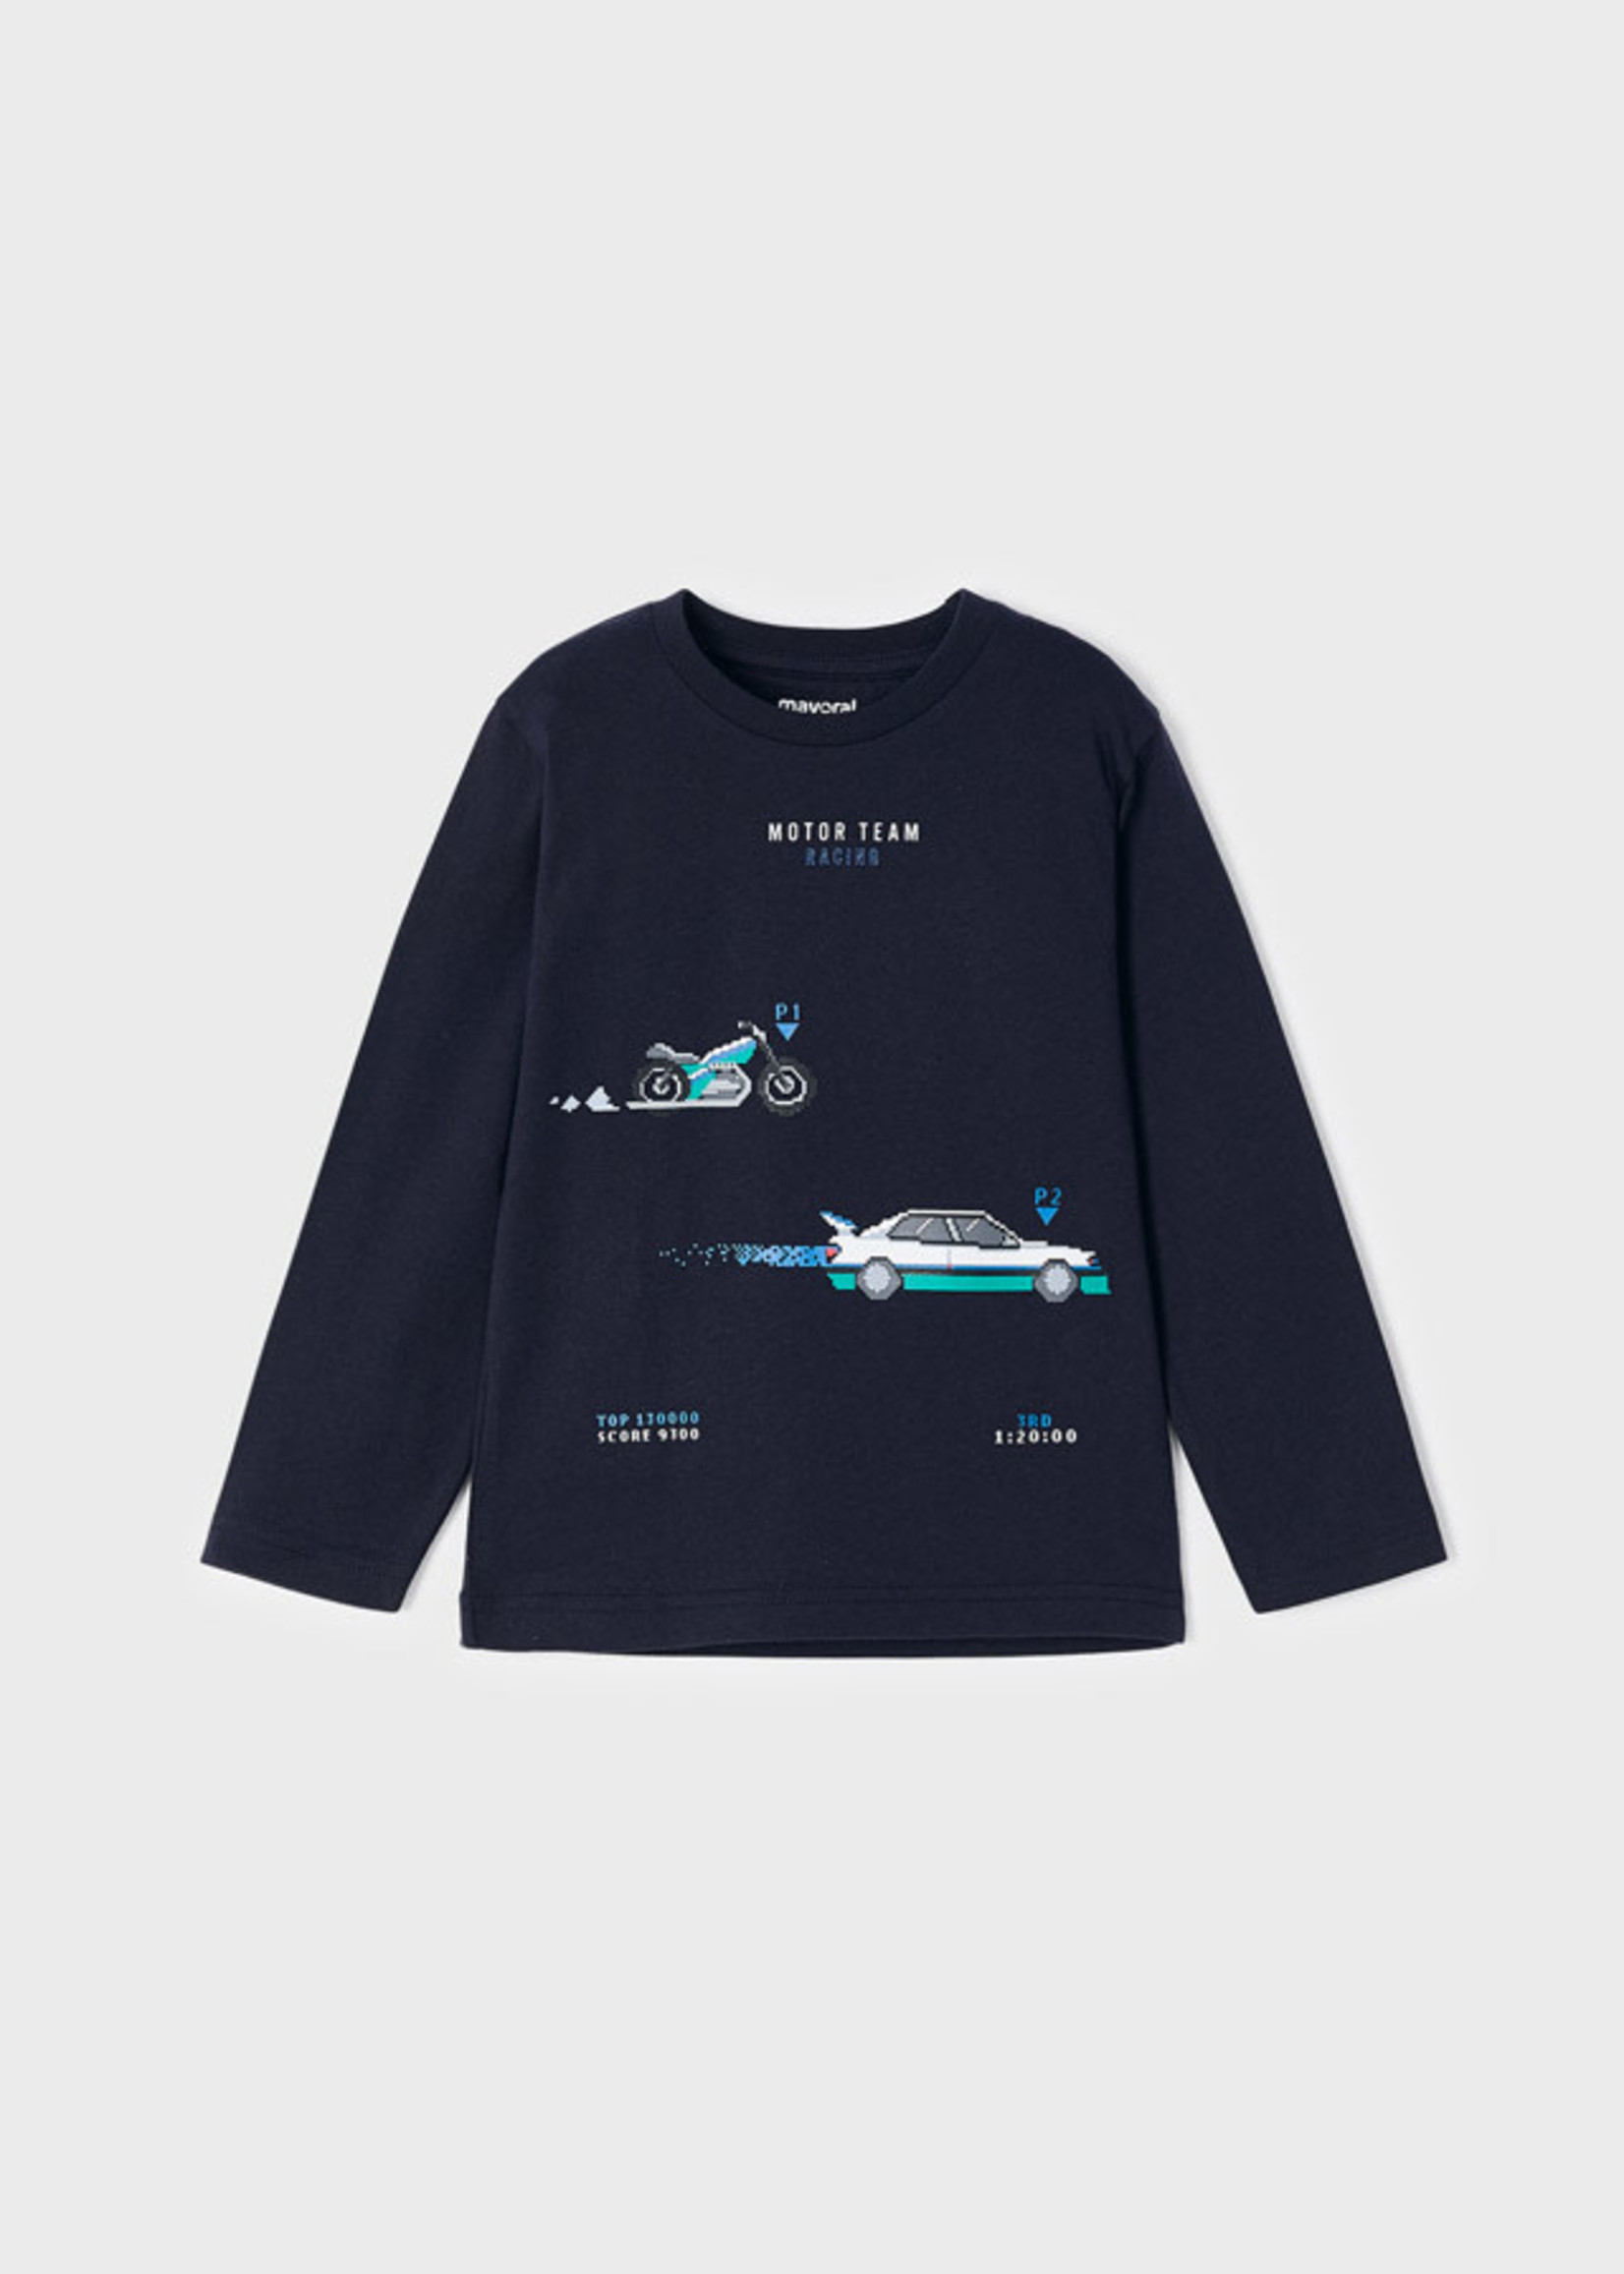 Mayoral Mayoral L/S shirt automobiles Navy - 22 04008